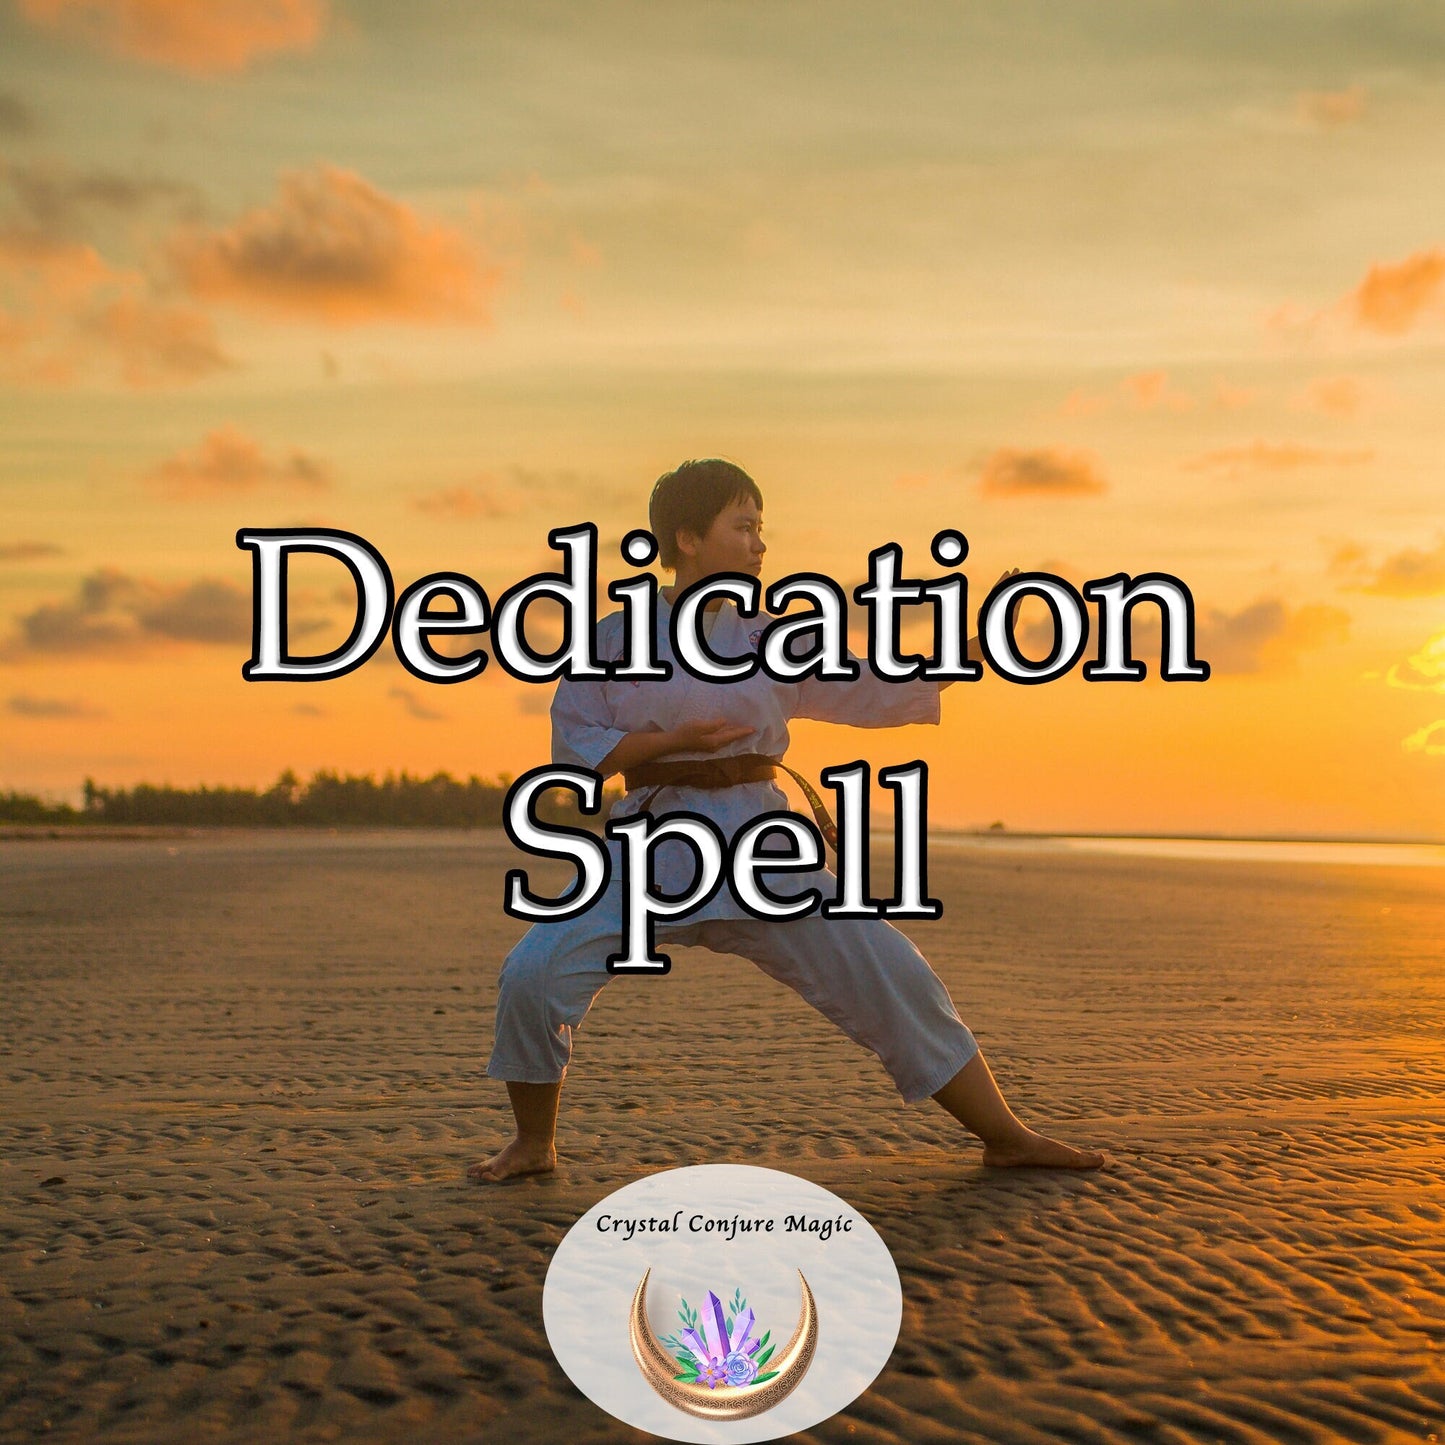 Dedication Spell -  reinforce your spirit to become the dedicated individual you aspire to be